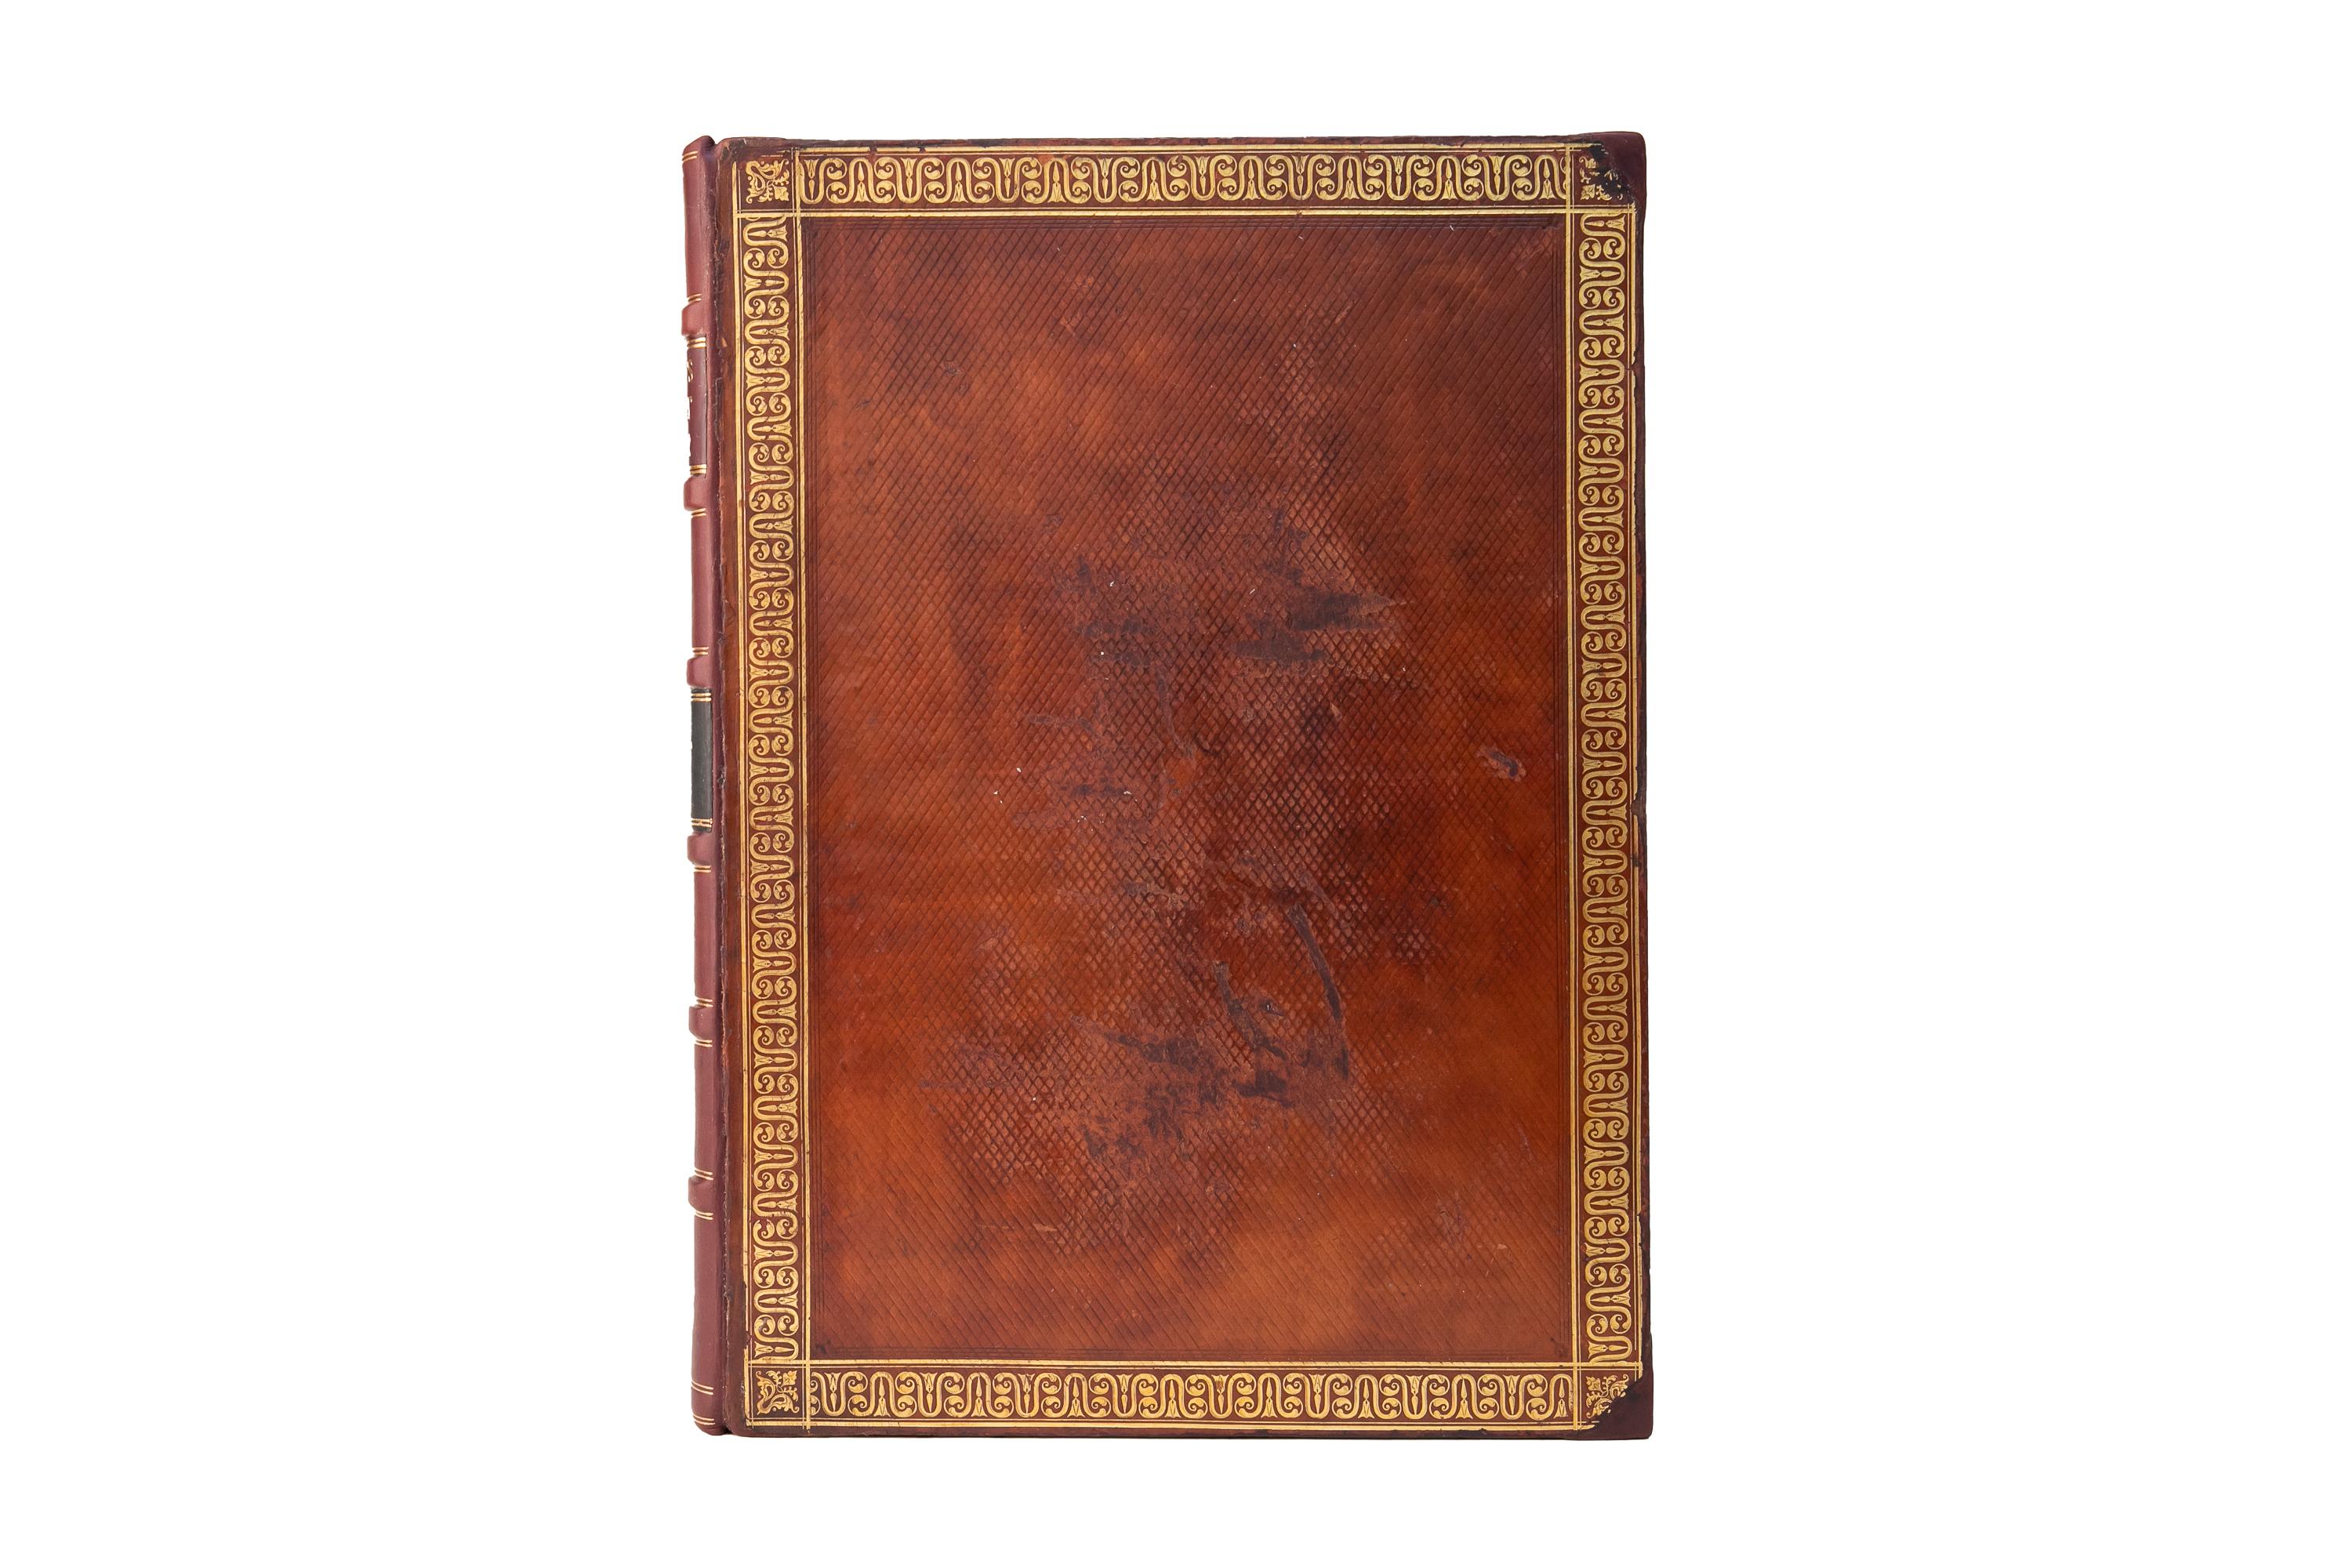 3 Volumes. Samuel Rush Meyrick, Ancient Armour. Bound in full tan calf with the covers displaying gilt-tooled borders and an open-tooled cross-hatching pattern. Respines in purple morocco with gilt-tooled detailing and green morocco labels. All